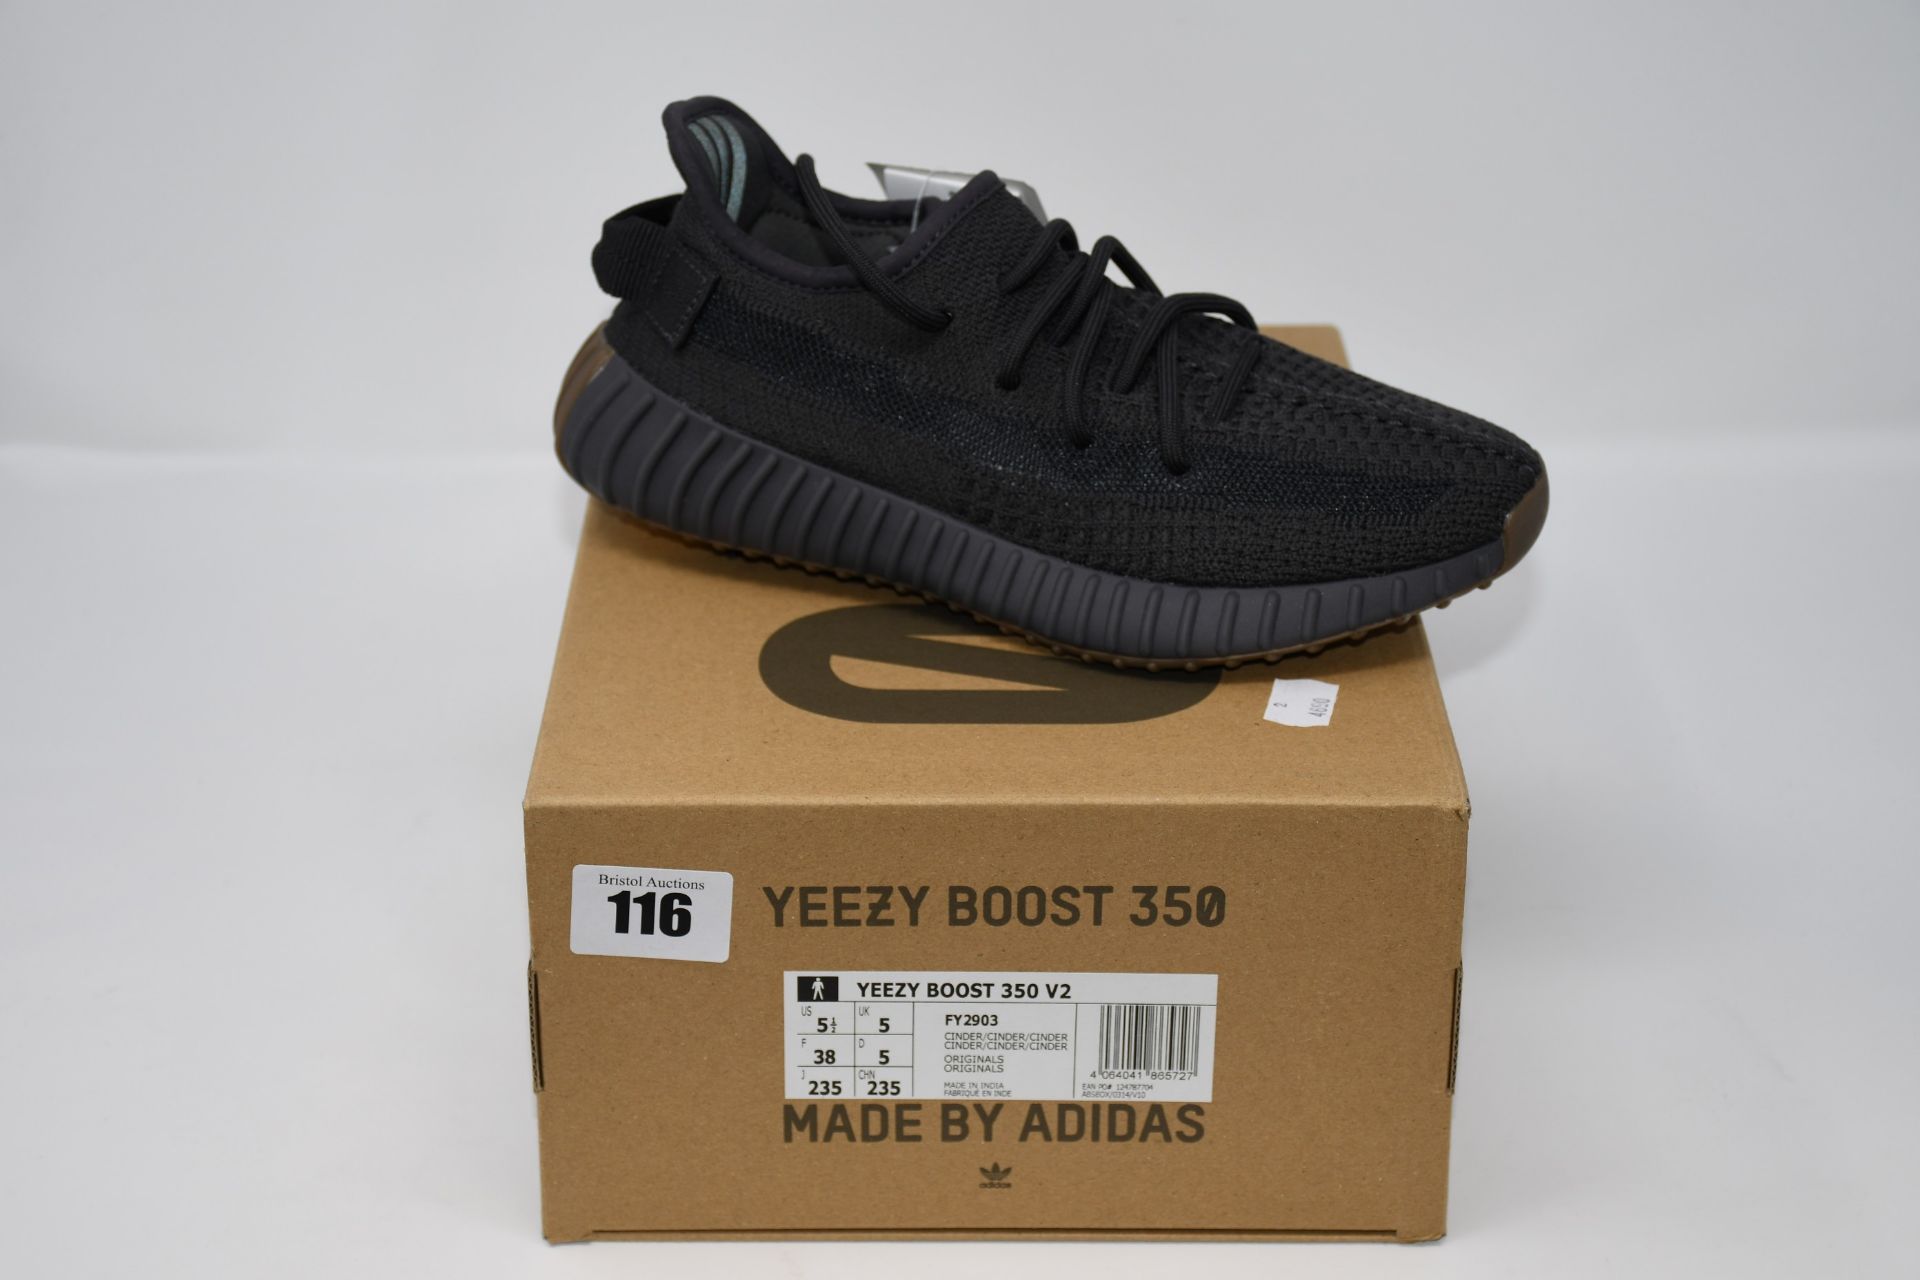 A pair of as new Adidas Yeezy Boost 350 V2 trainers (UK 5).